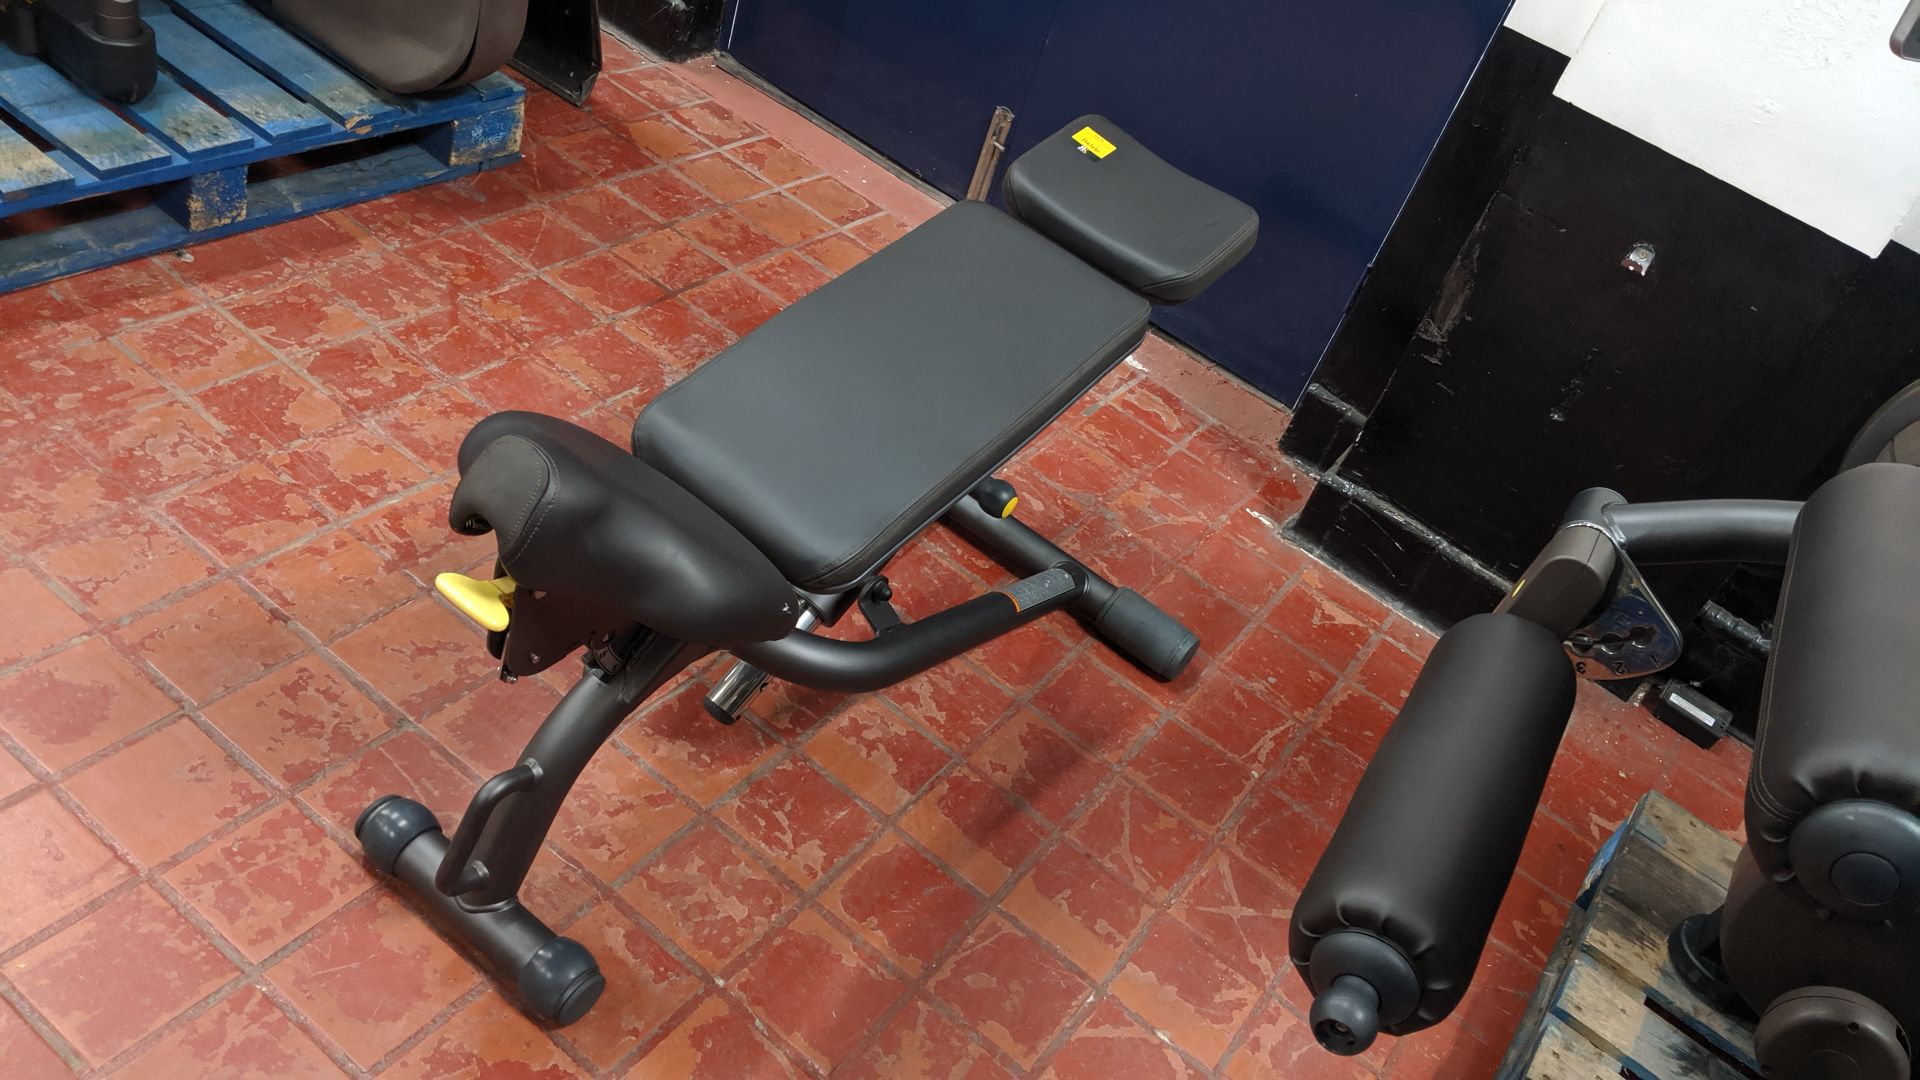 Technogym adjustable bench Purchased new in 2016 - refurbished/recommissioned by Technogym - - Image 4 of 5